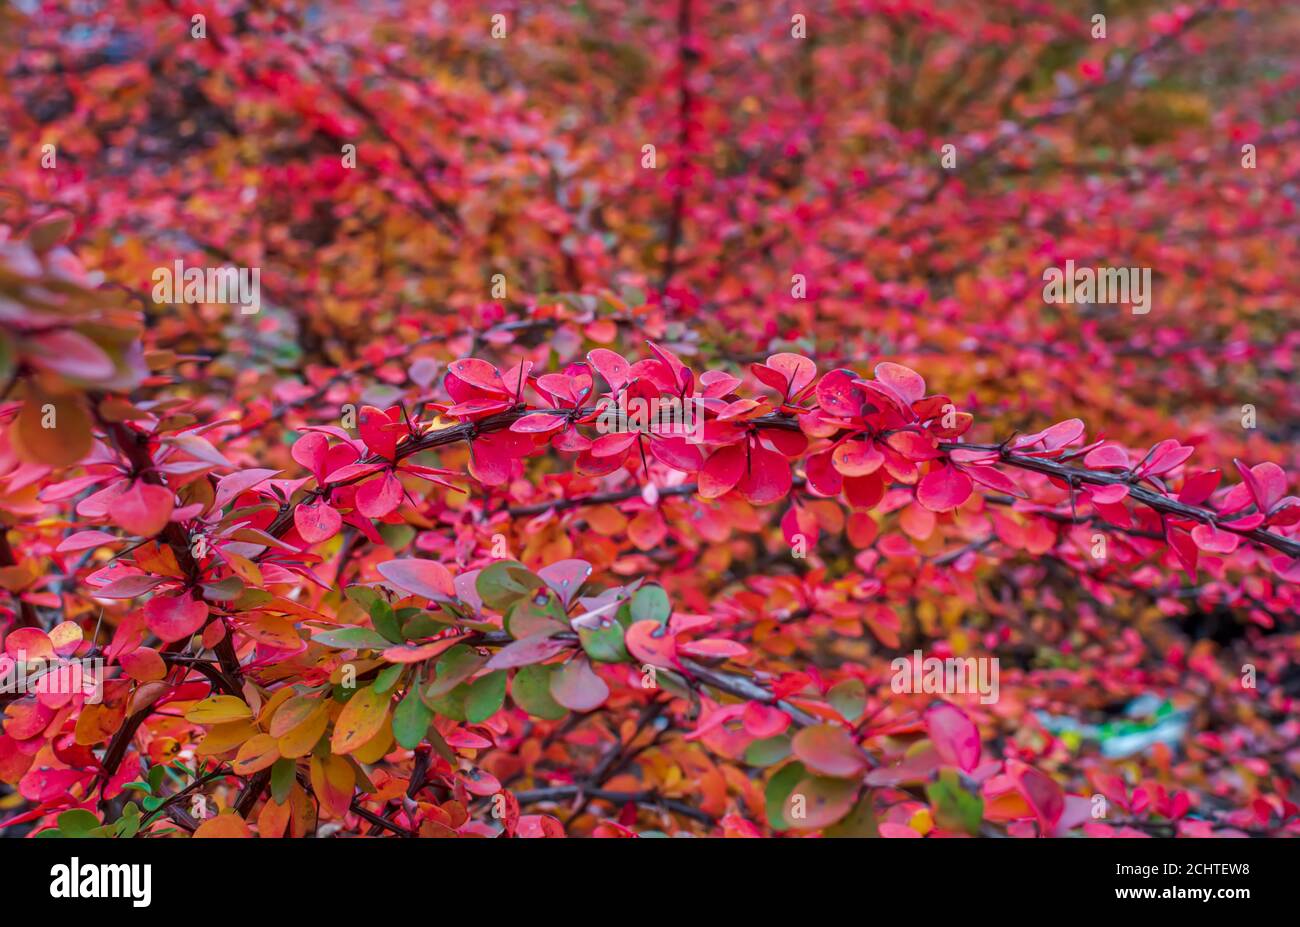 Bright red and green Berberis thunbergii (Japanese barberry) leaves background Stock Photo